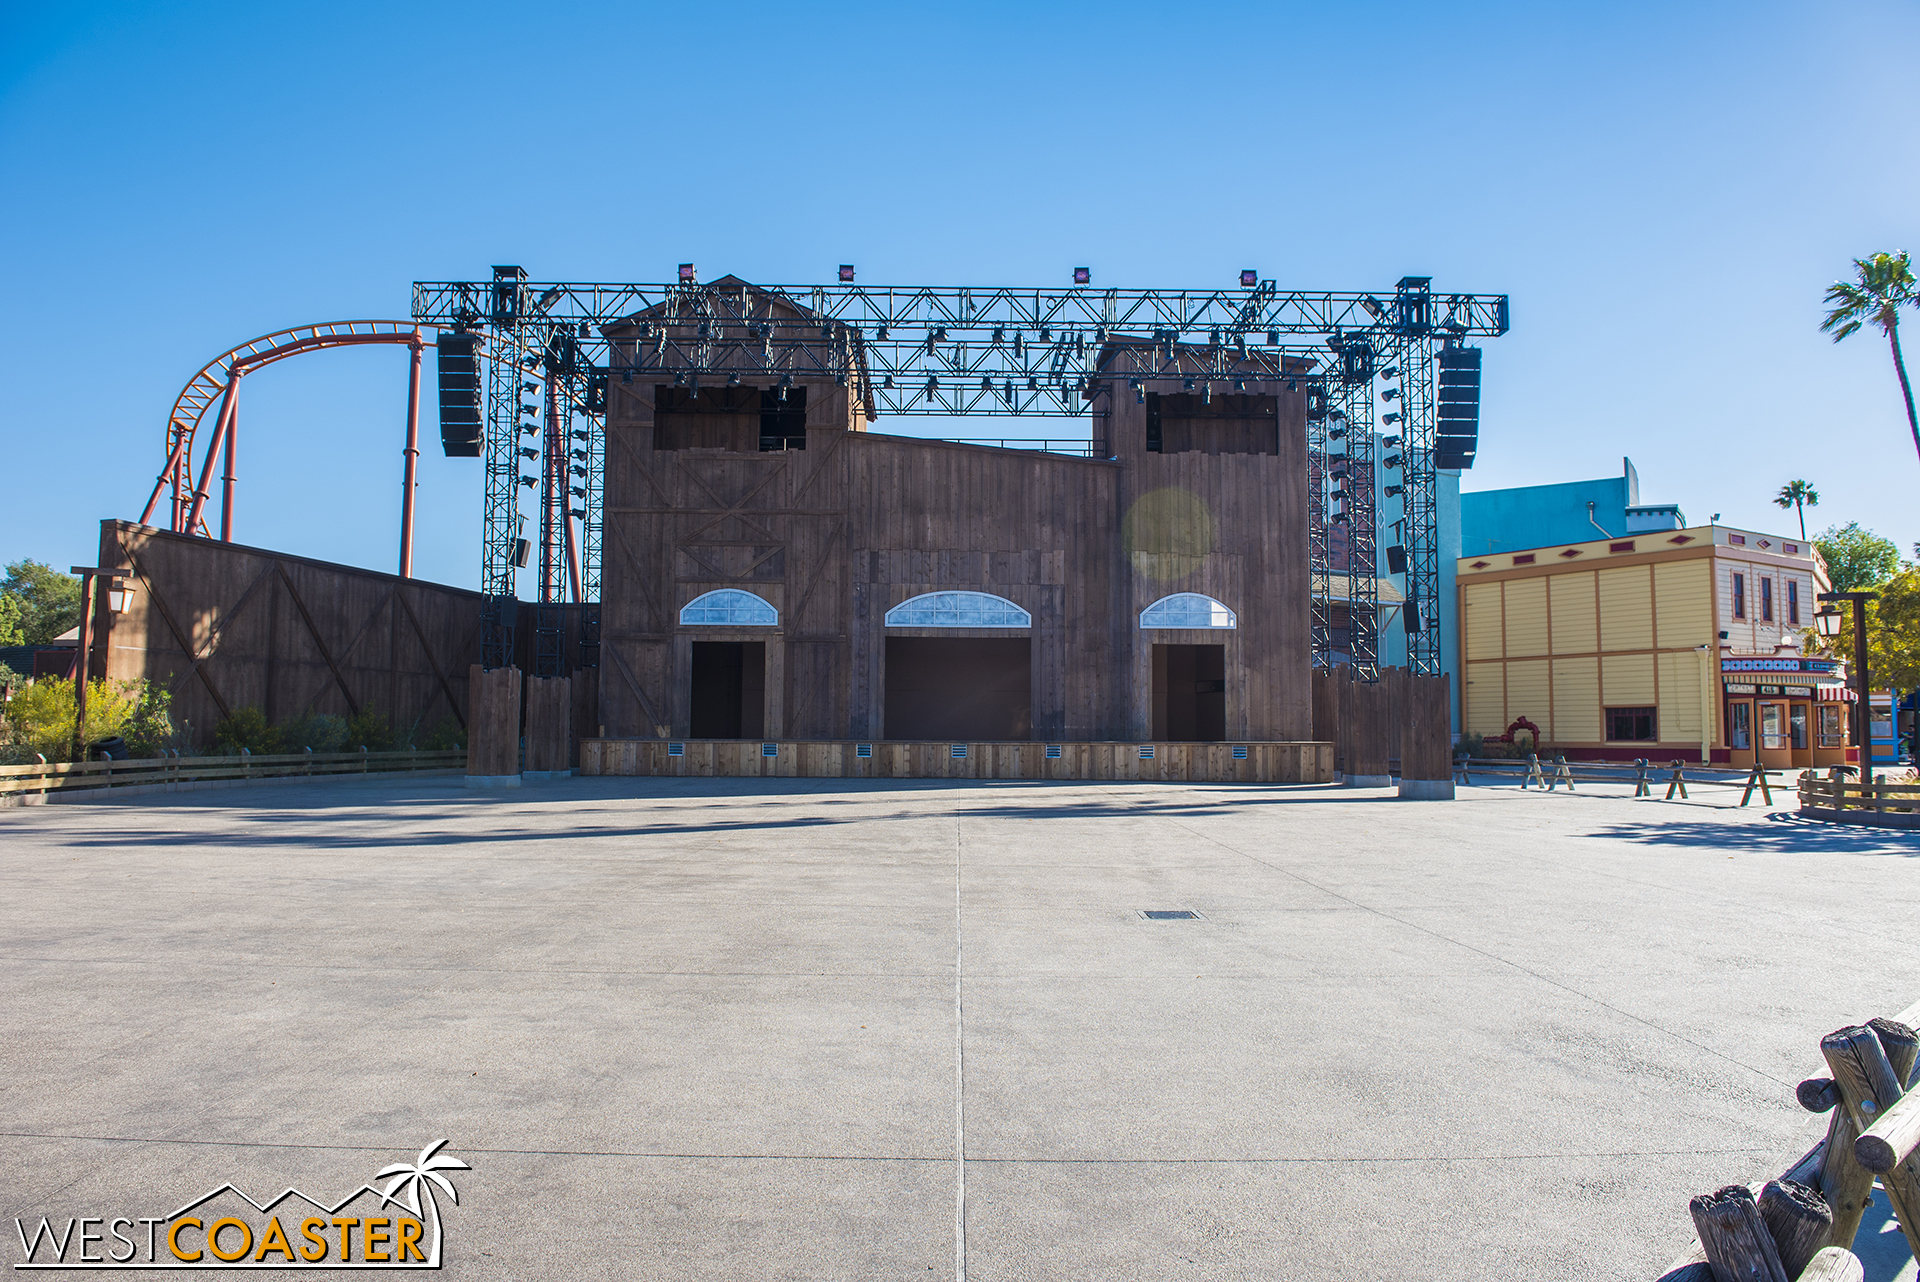  This is what the Calico Stage looks like when no show is going on.  The actual stage itself is removable and can clear a lot of room in front of the facade. 